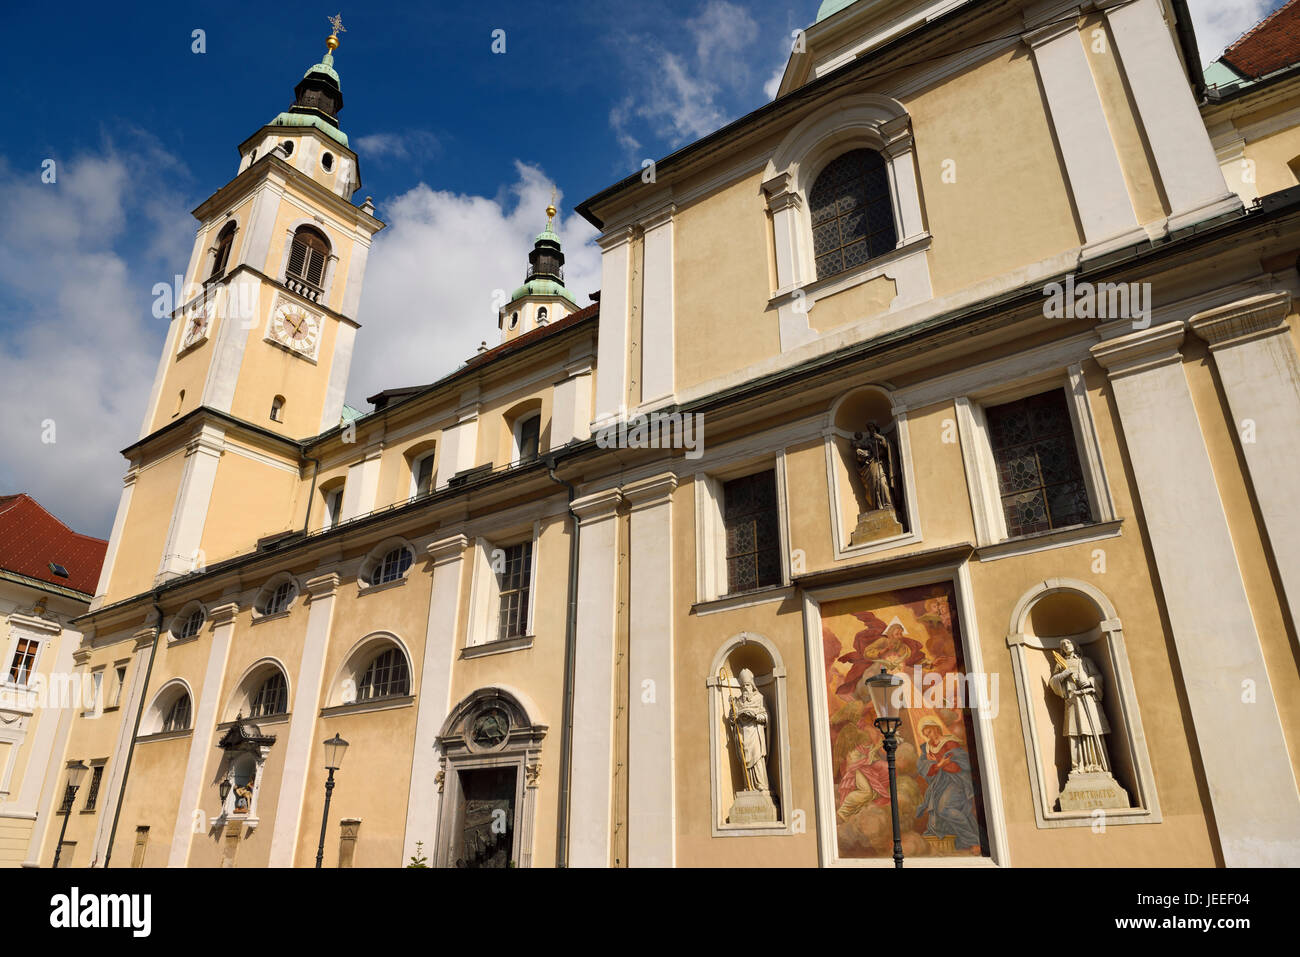 Southern facade of St. Nicholas church Ljubljana Cathedral Slovenia with belfry, frescoe, and statues of saints Joseph, Hermagoras and Fortunatus Stock Photo